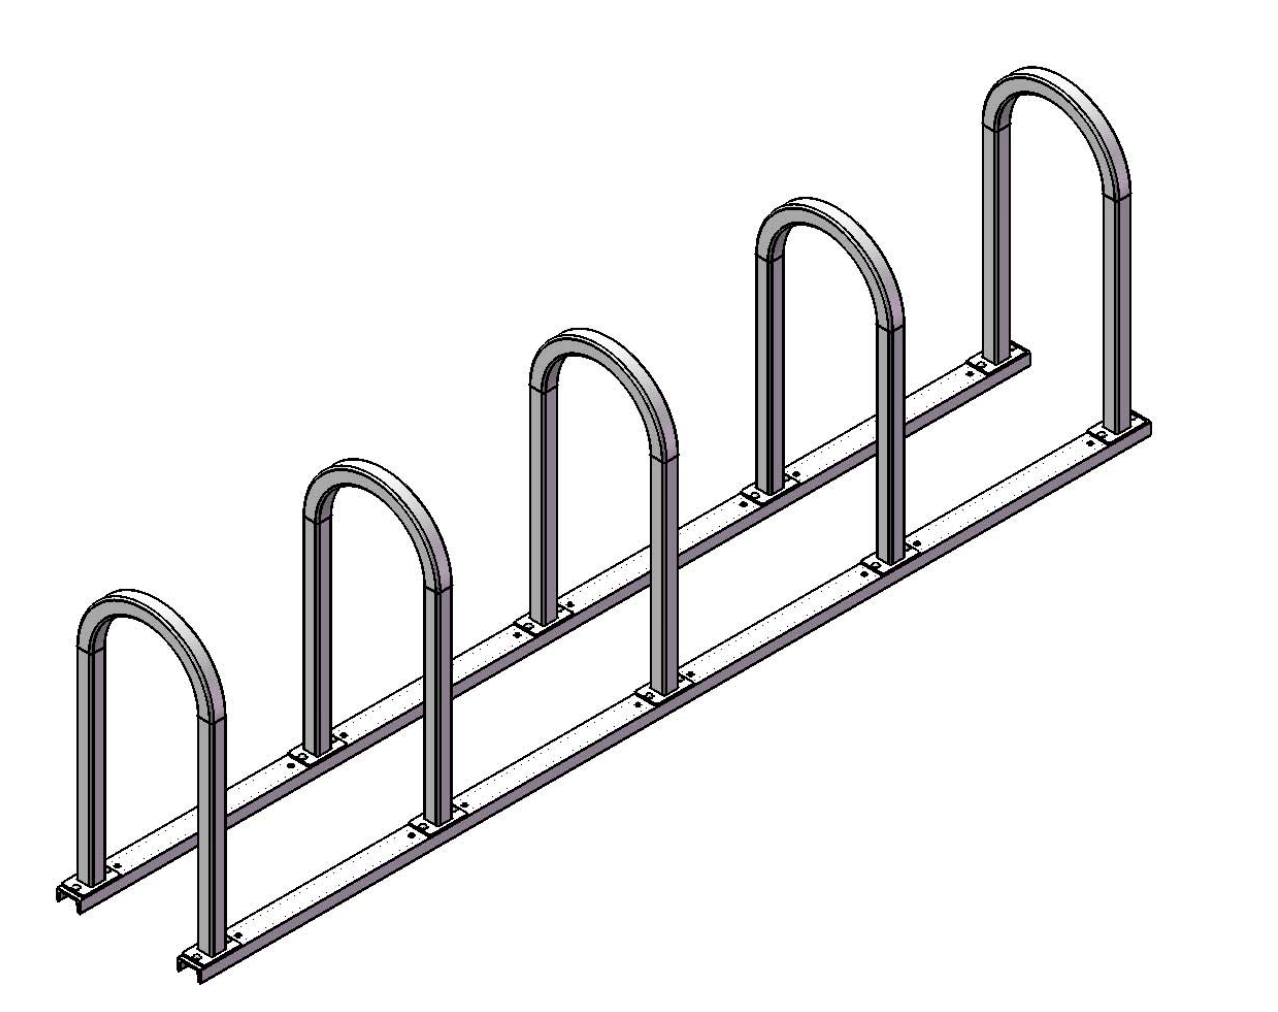 Inverted Bicycle Rack | WillyGoat Playground & Park Equipment